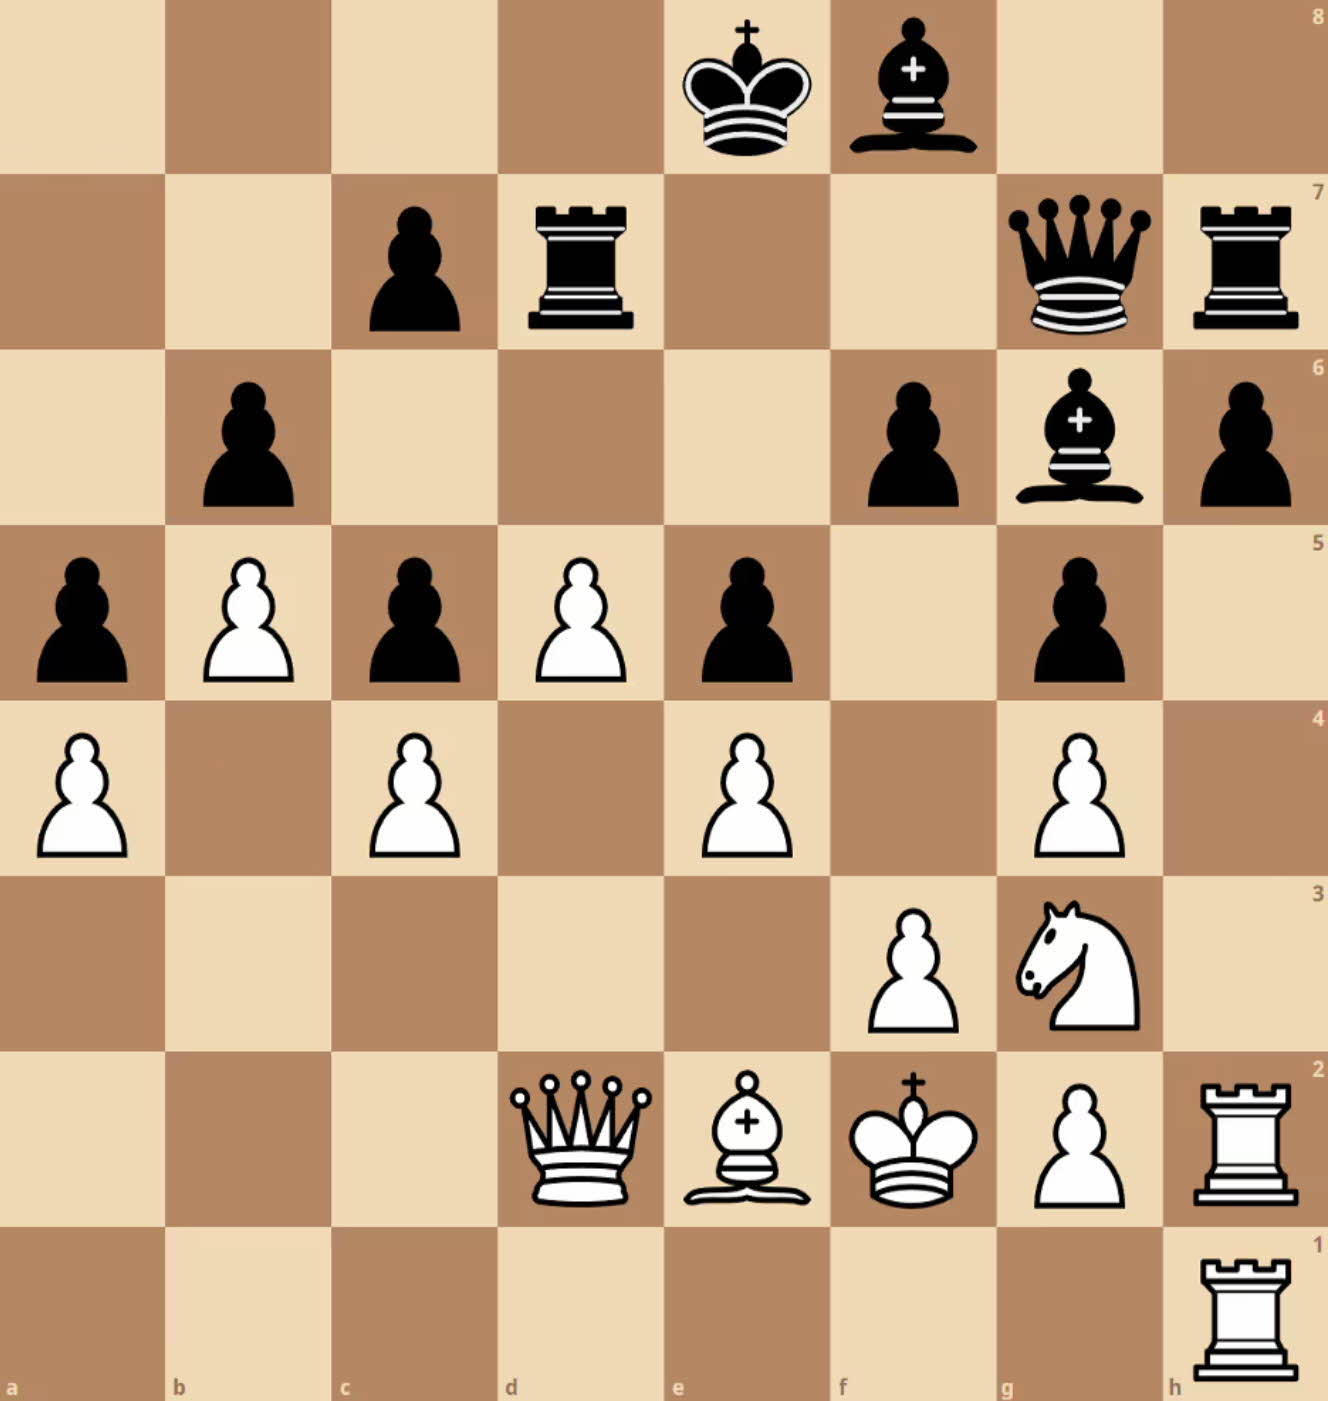 We know that chess is great game, but for some people too boring